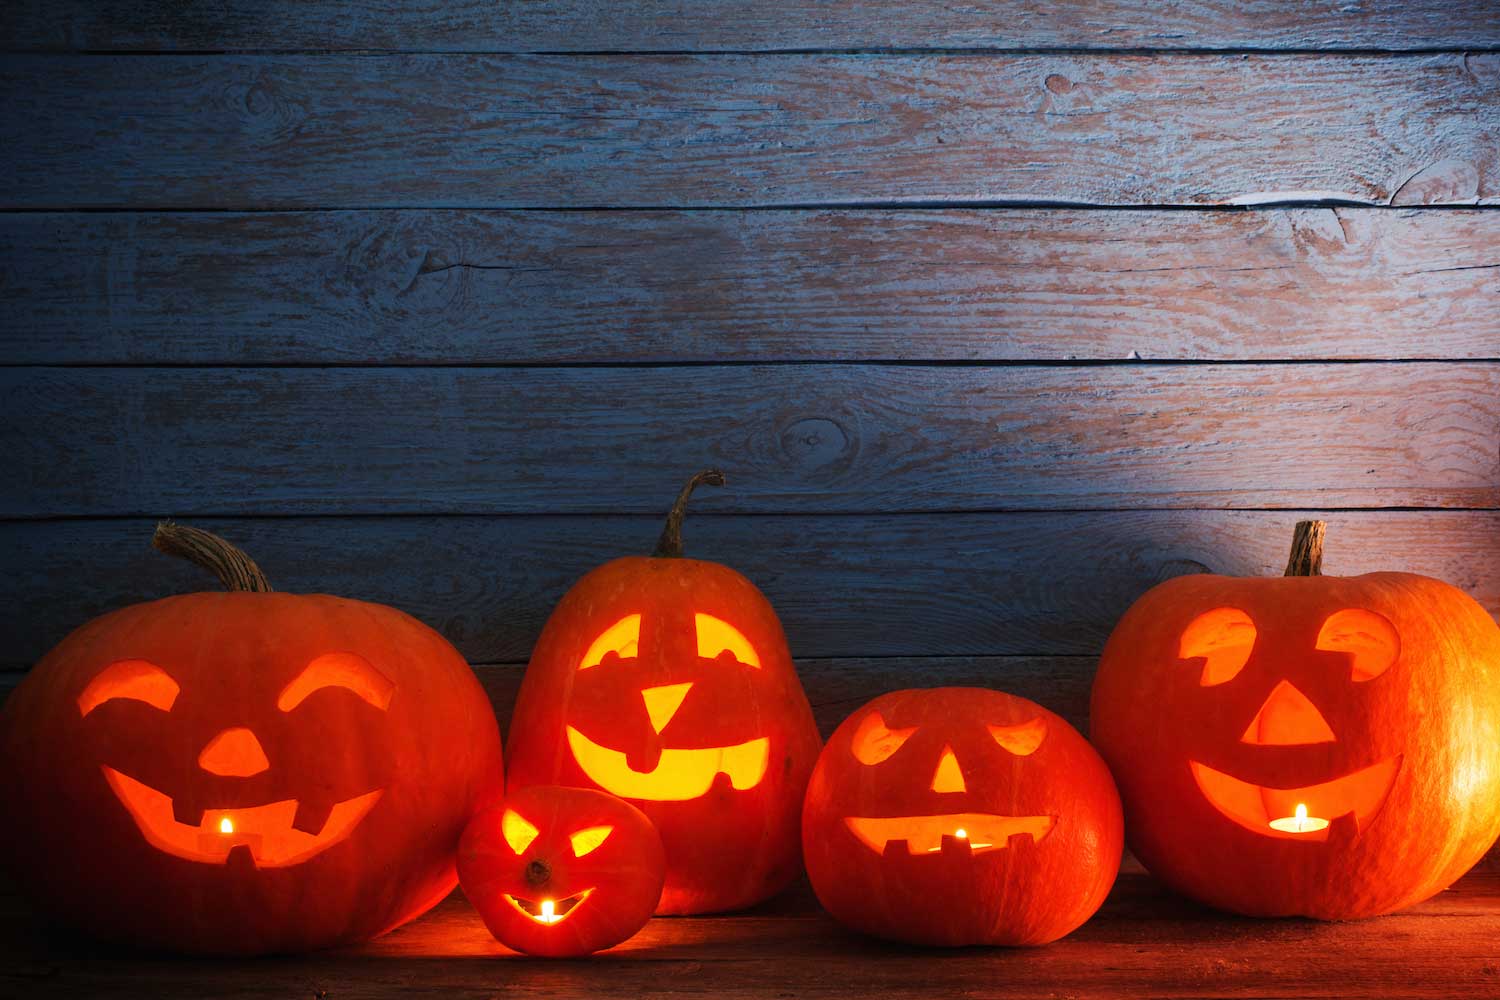 Lit jack o' lanterns against a wooden wall.